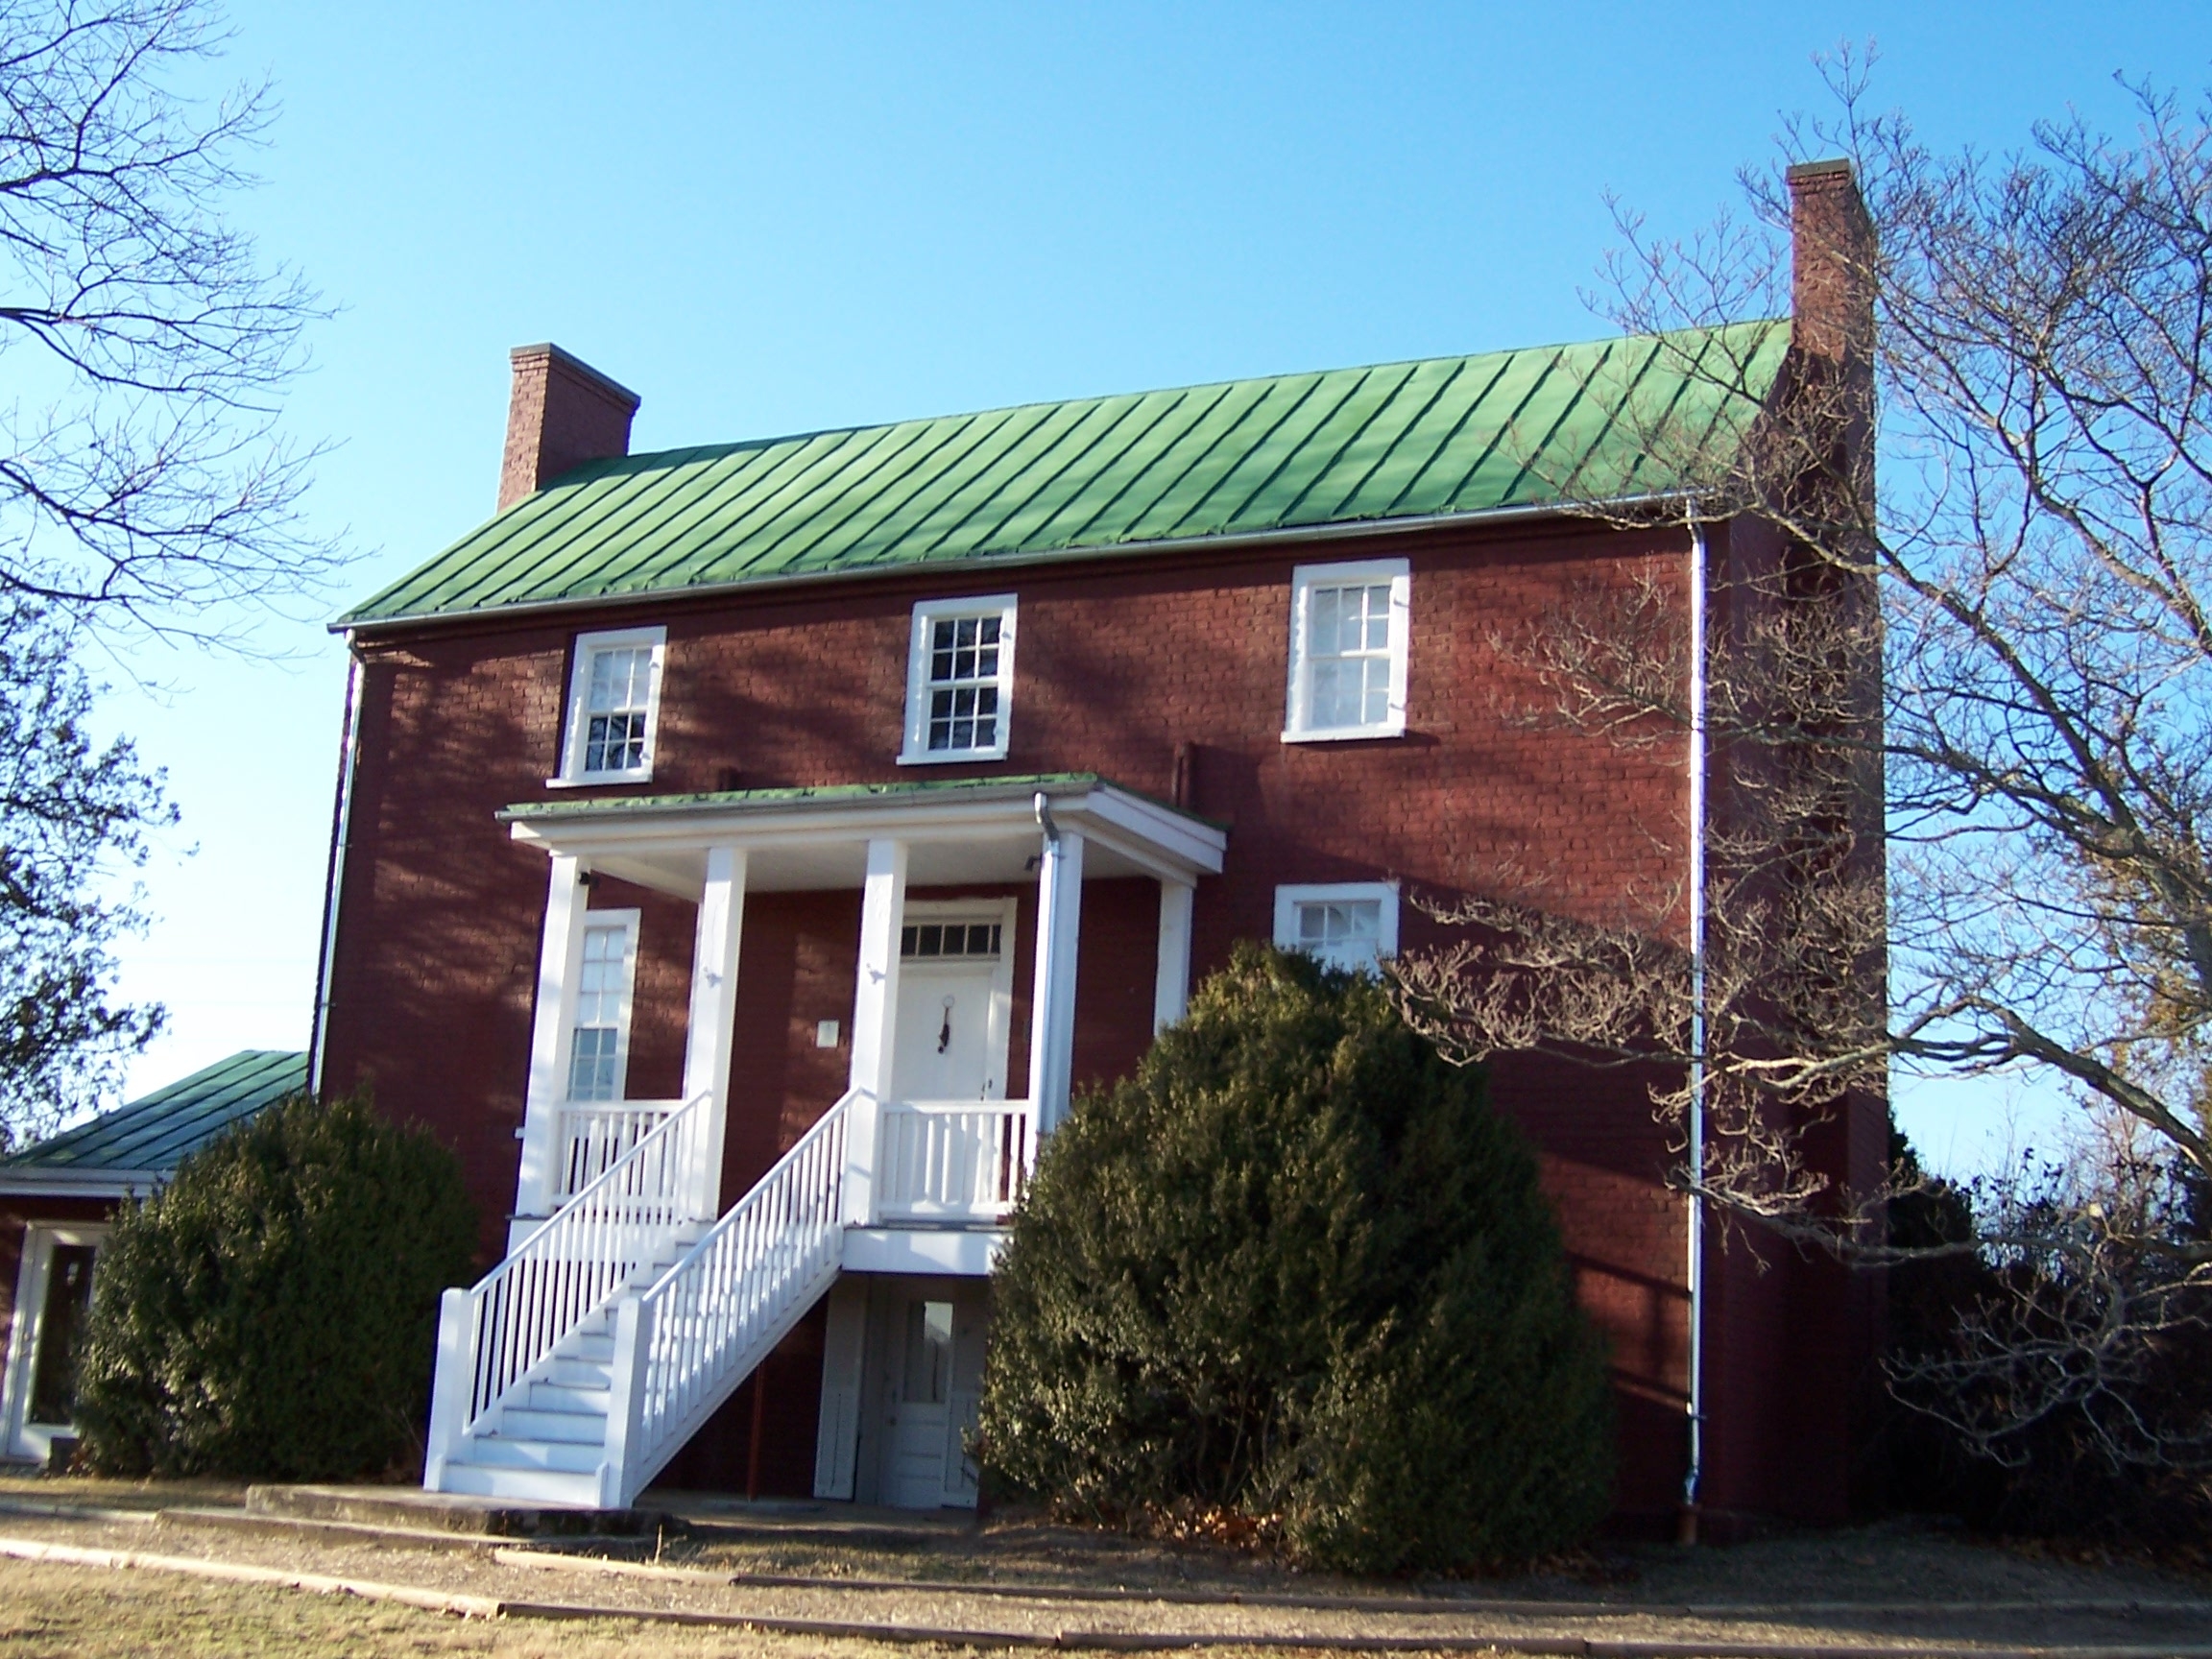 NELSON COUNTY HISTORICAL SOCIETY